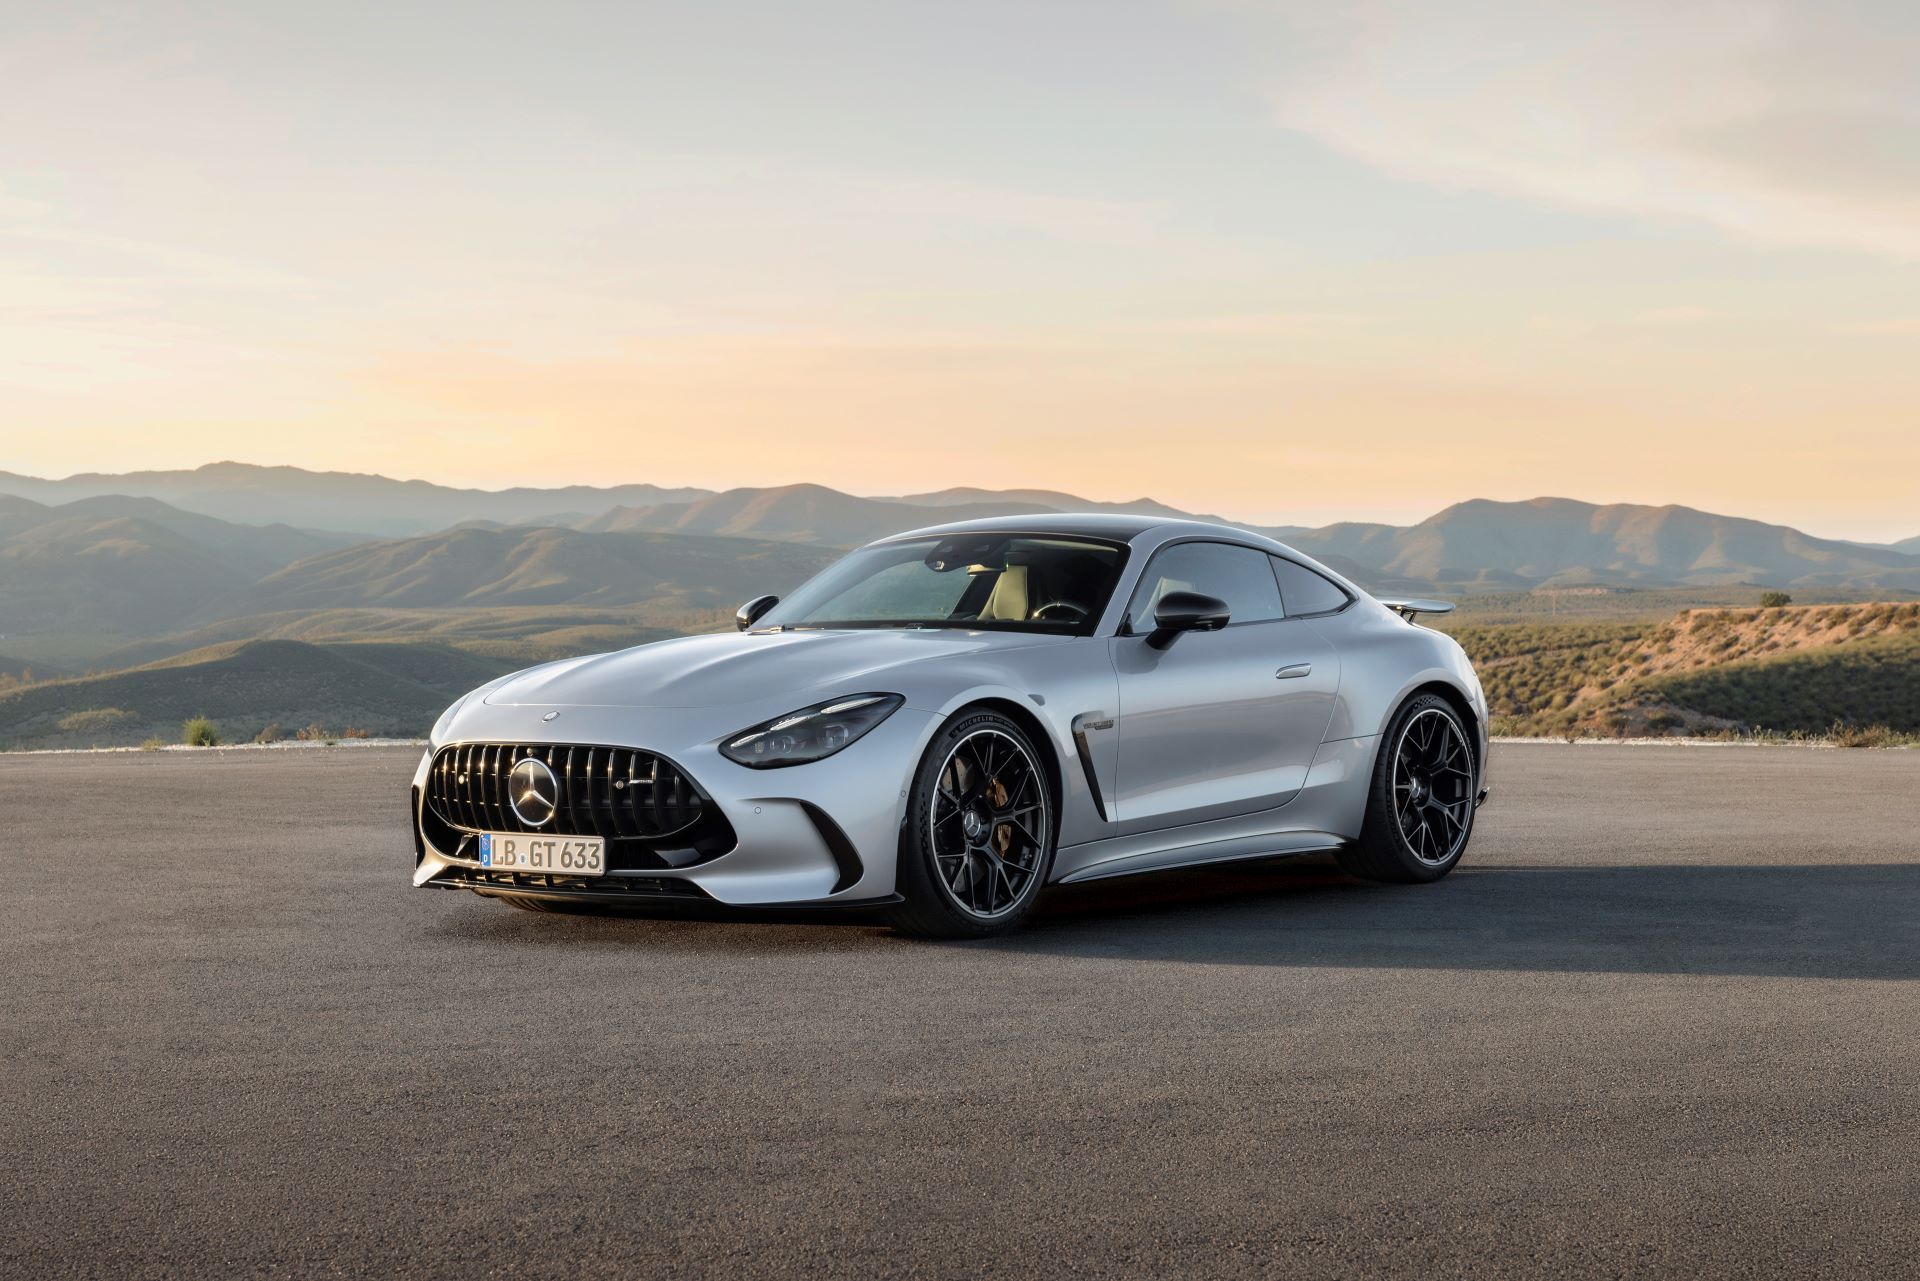 The all-new Mercedes-AMG GT Coupé